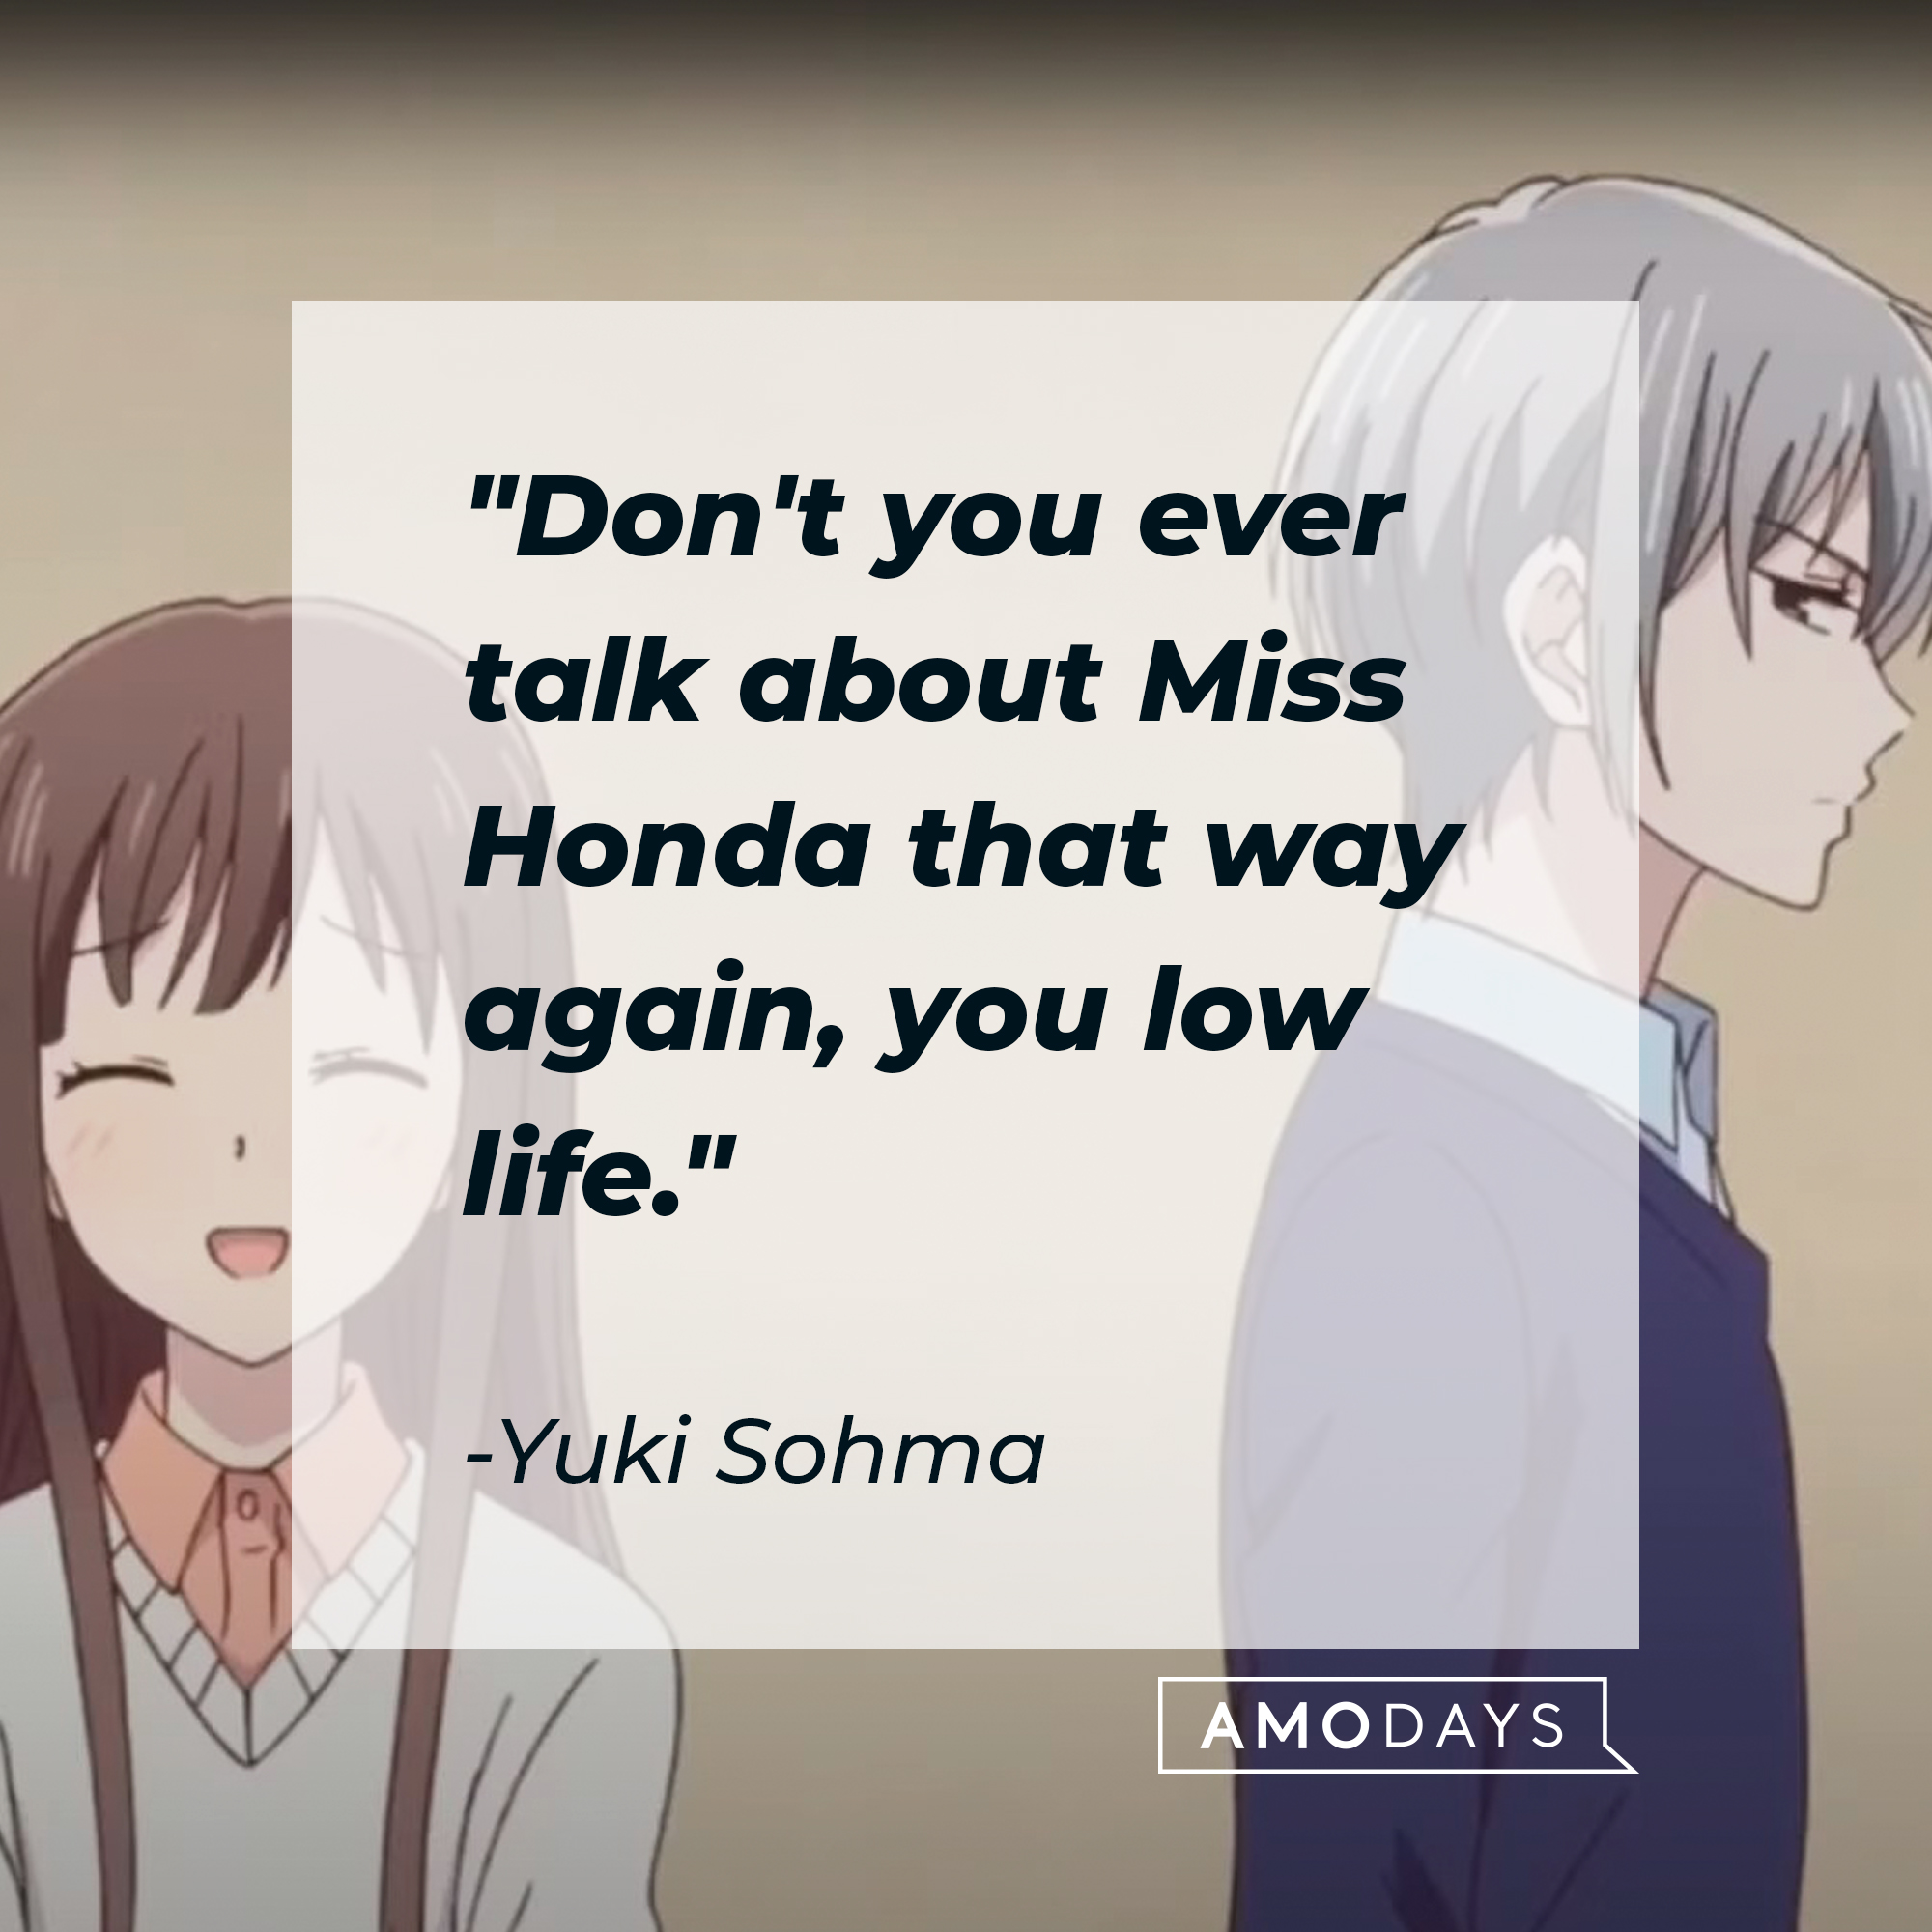 Yuki Sohma's quote: "Don't you ever talk about Miss Honda that way again, you low life." | Source: Facebook.com/FruitsBasketOfficial